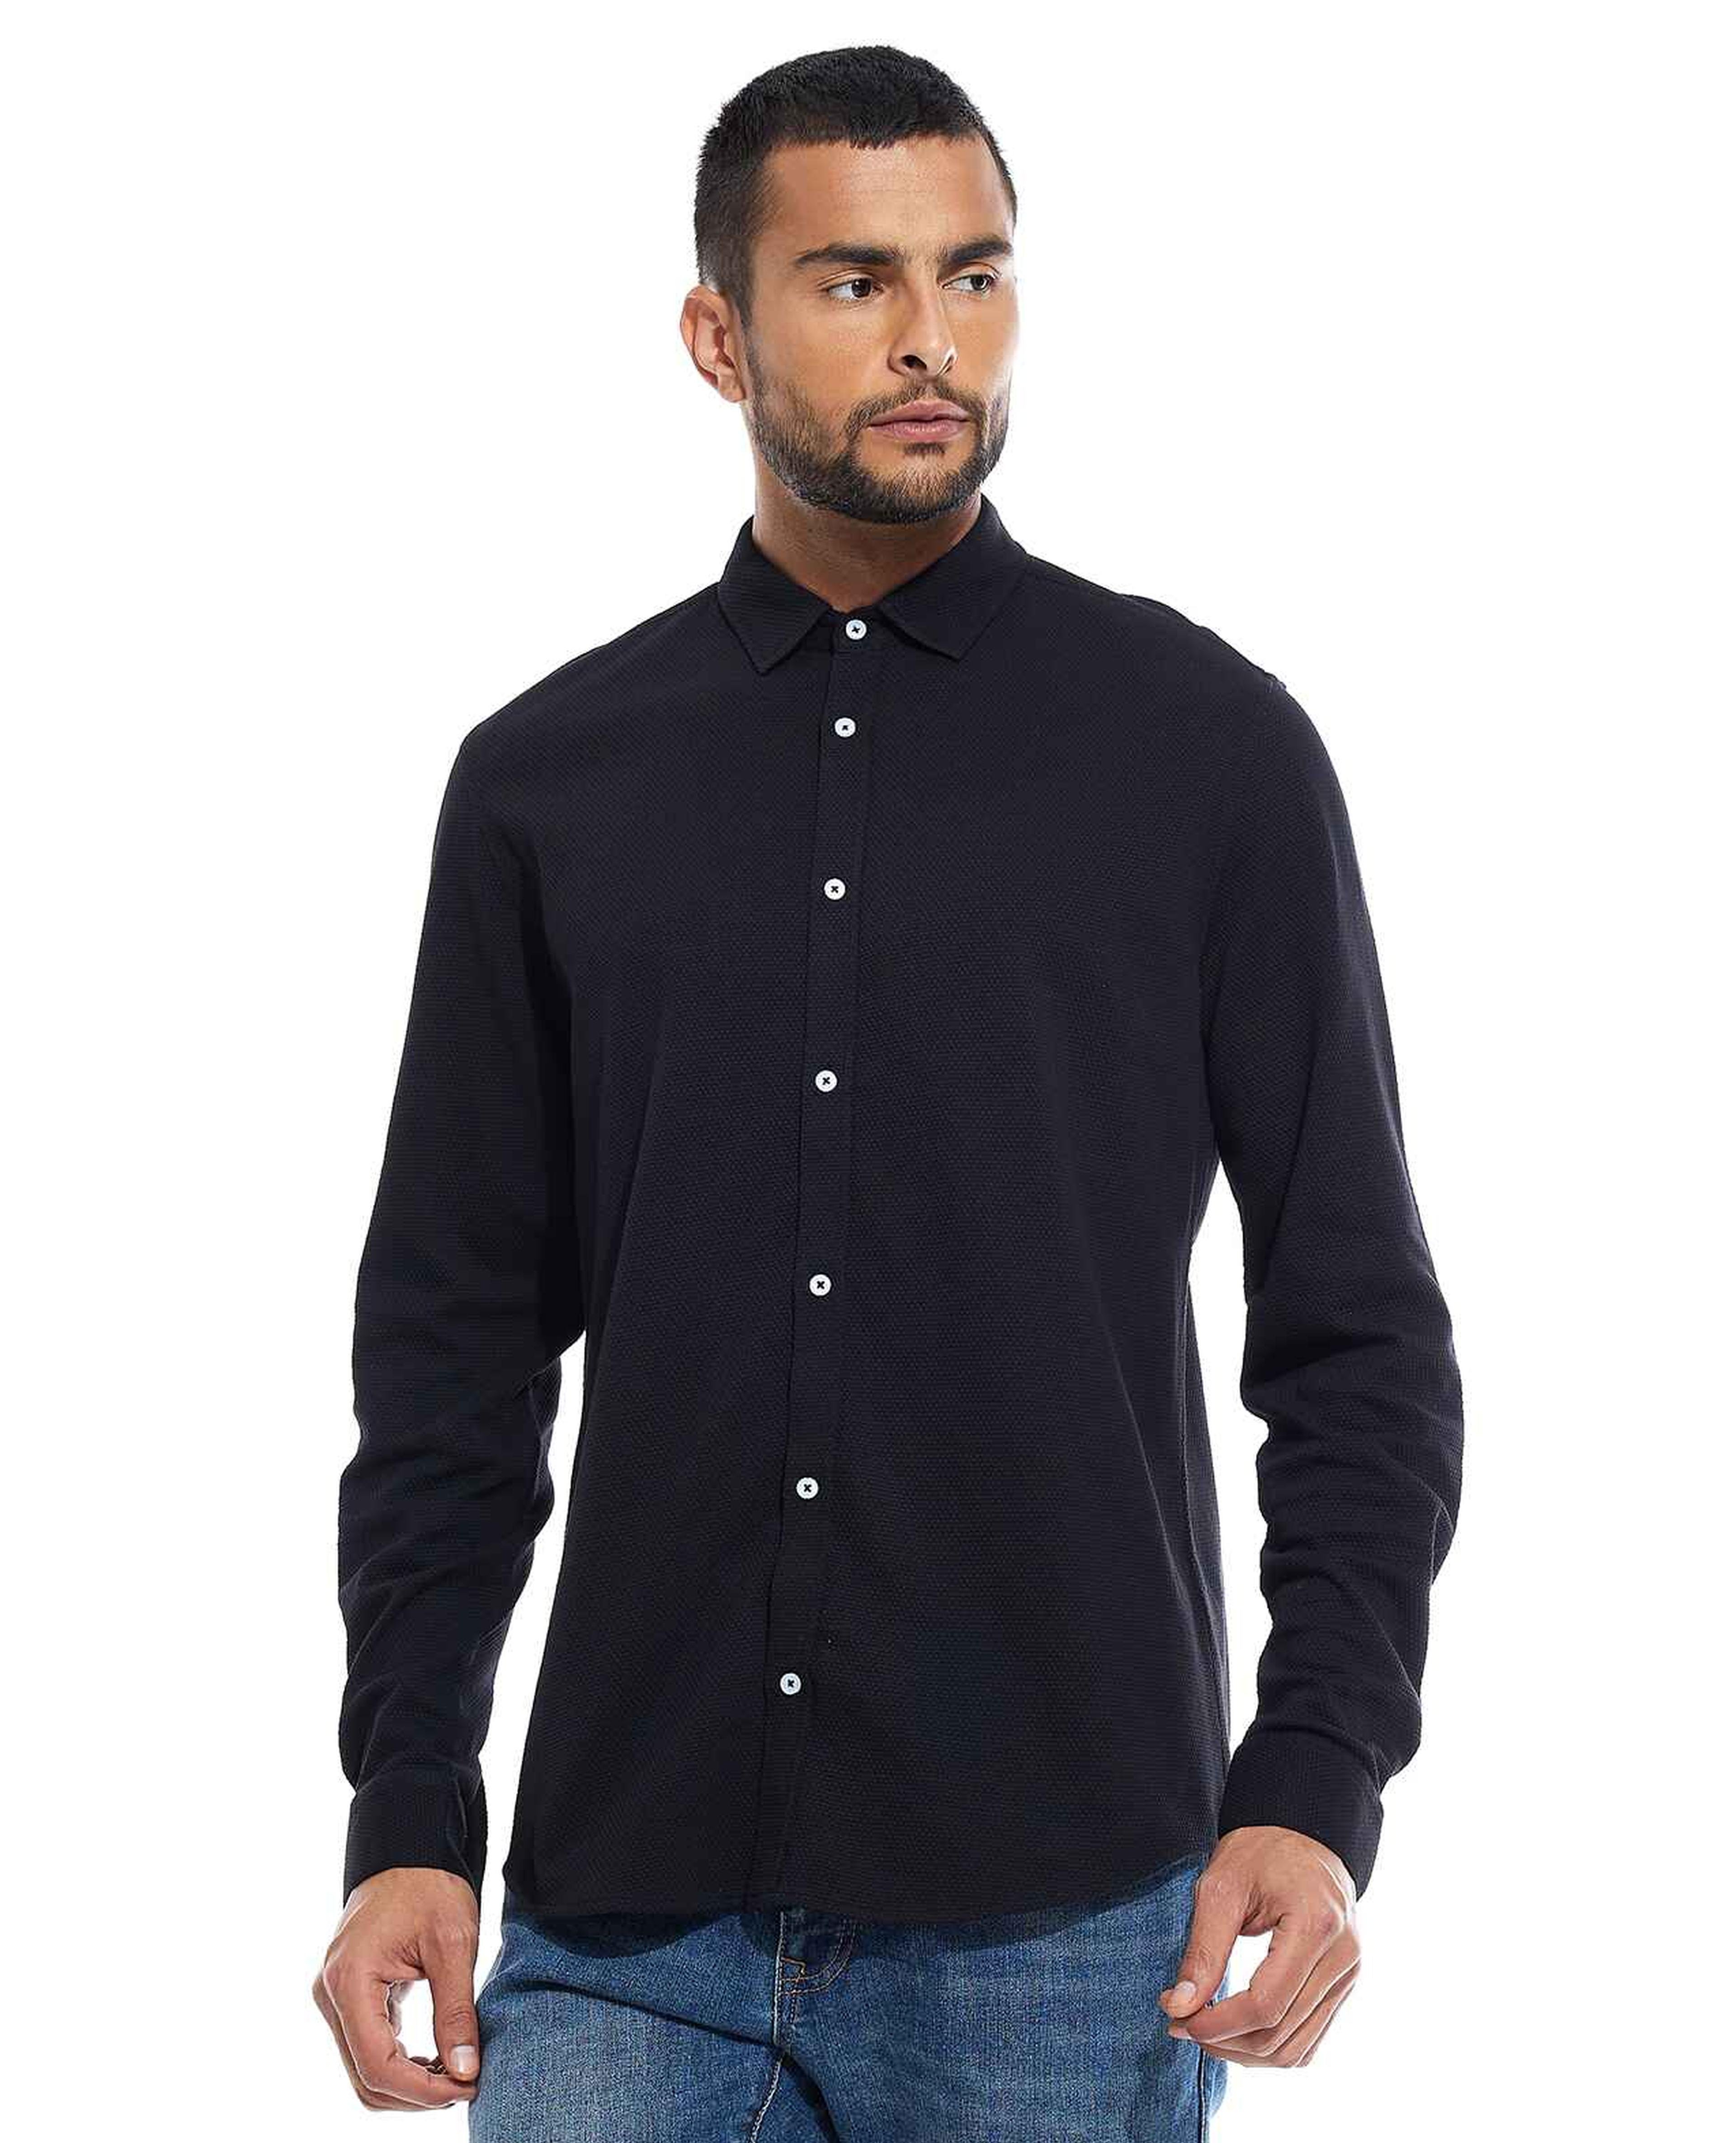 Textured Knit Shirt with Classic Collar and Long Sleeves